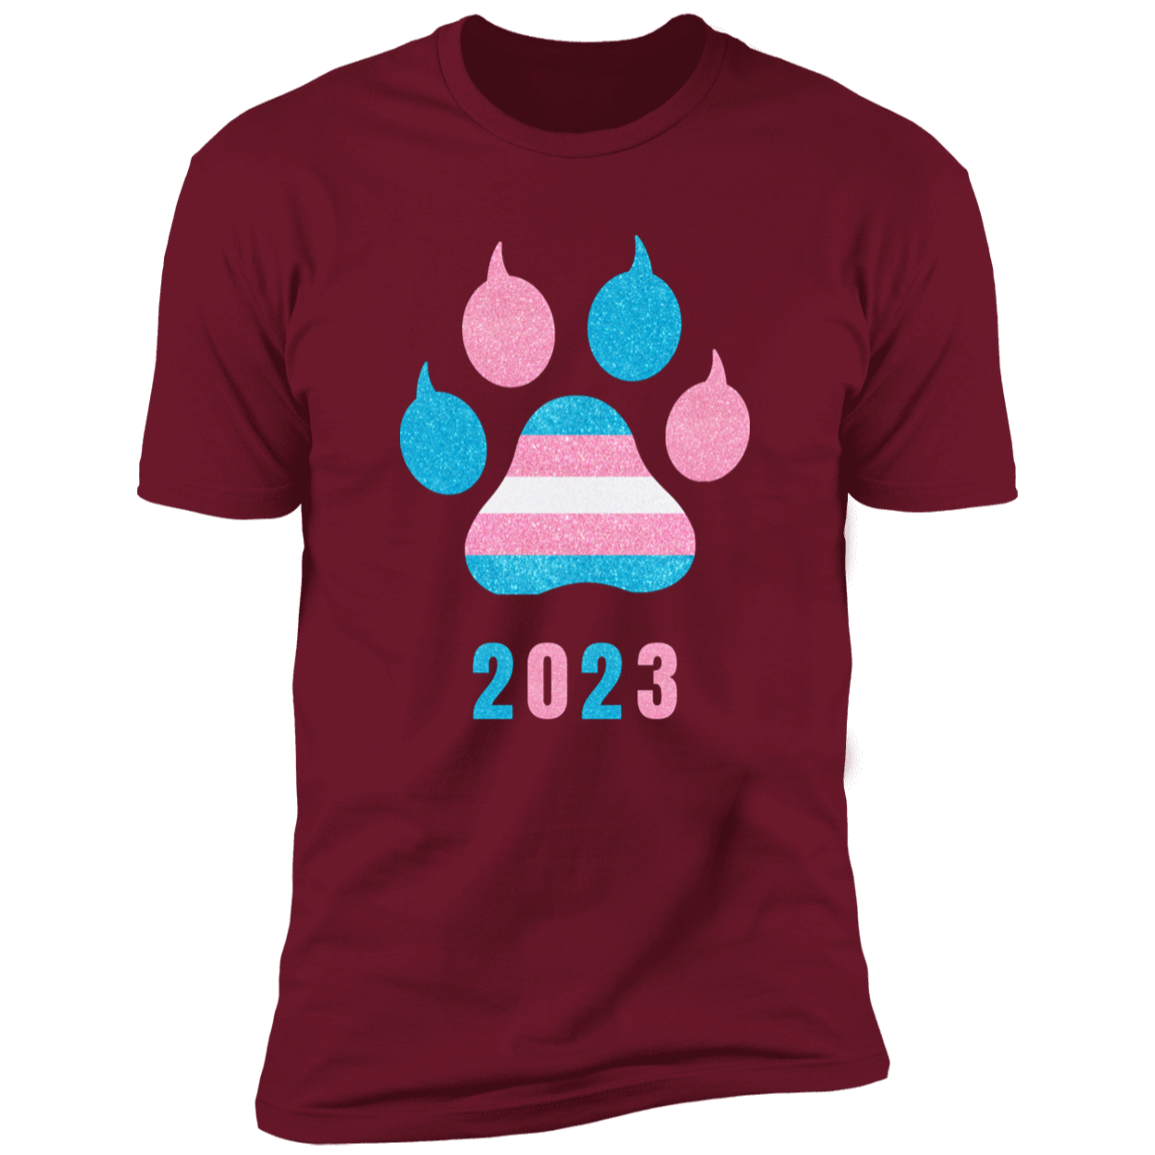 Trans Pride 2023 Cat Paw trans pride t-shirt,  trans cat paw pride shirt for humans, in cardinal red